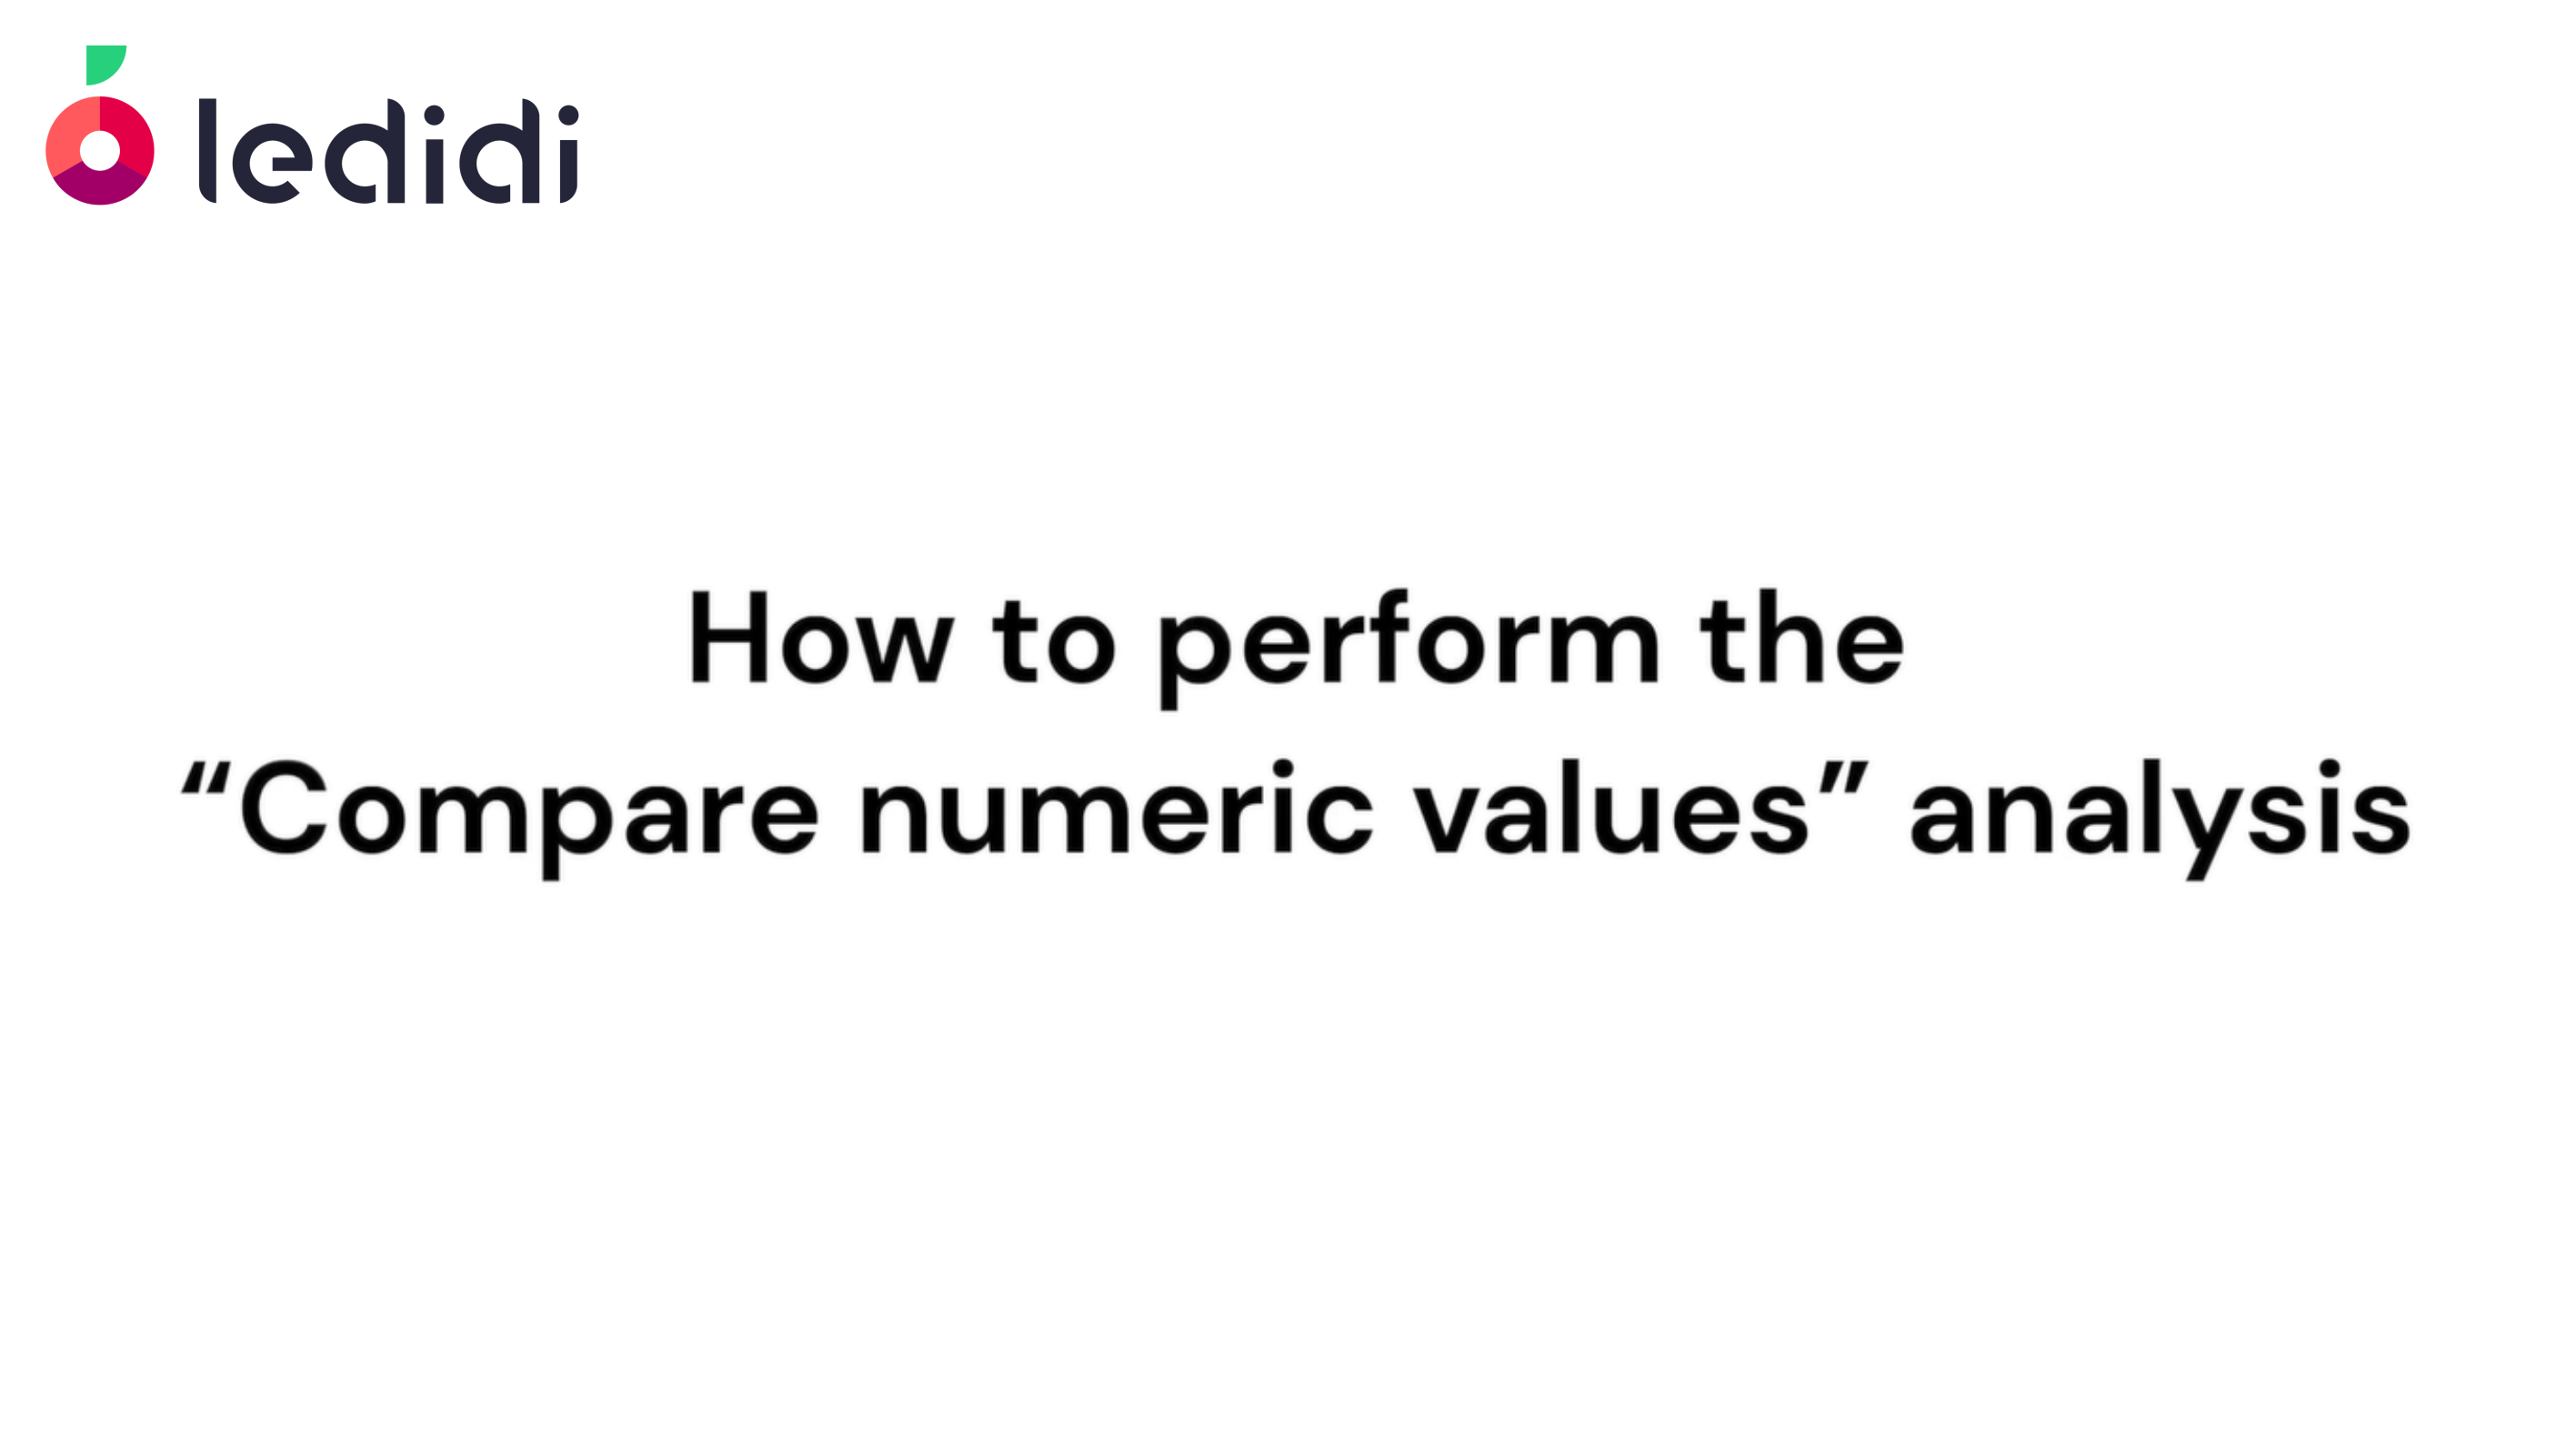 How to perform the "Compare numeric values" analysis